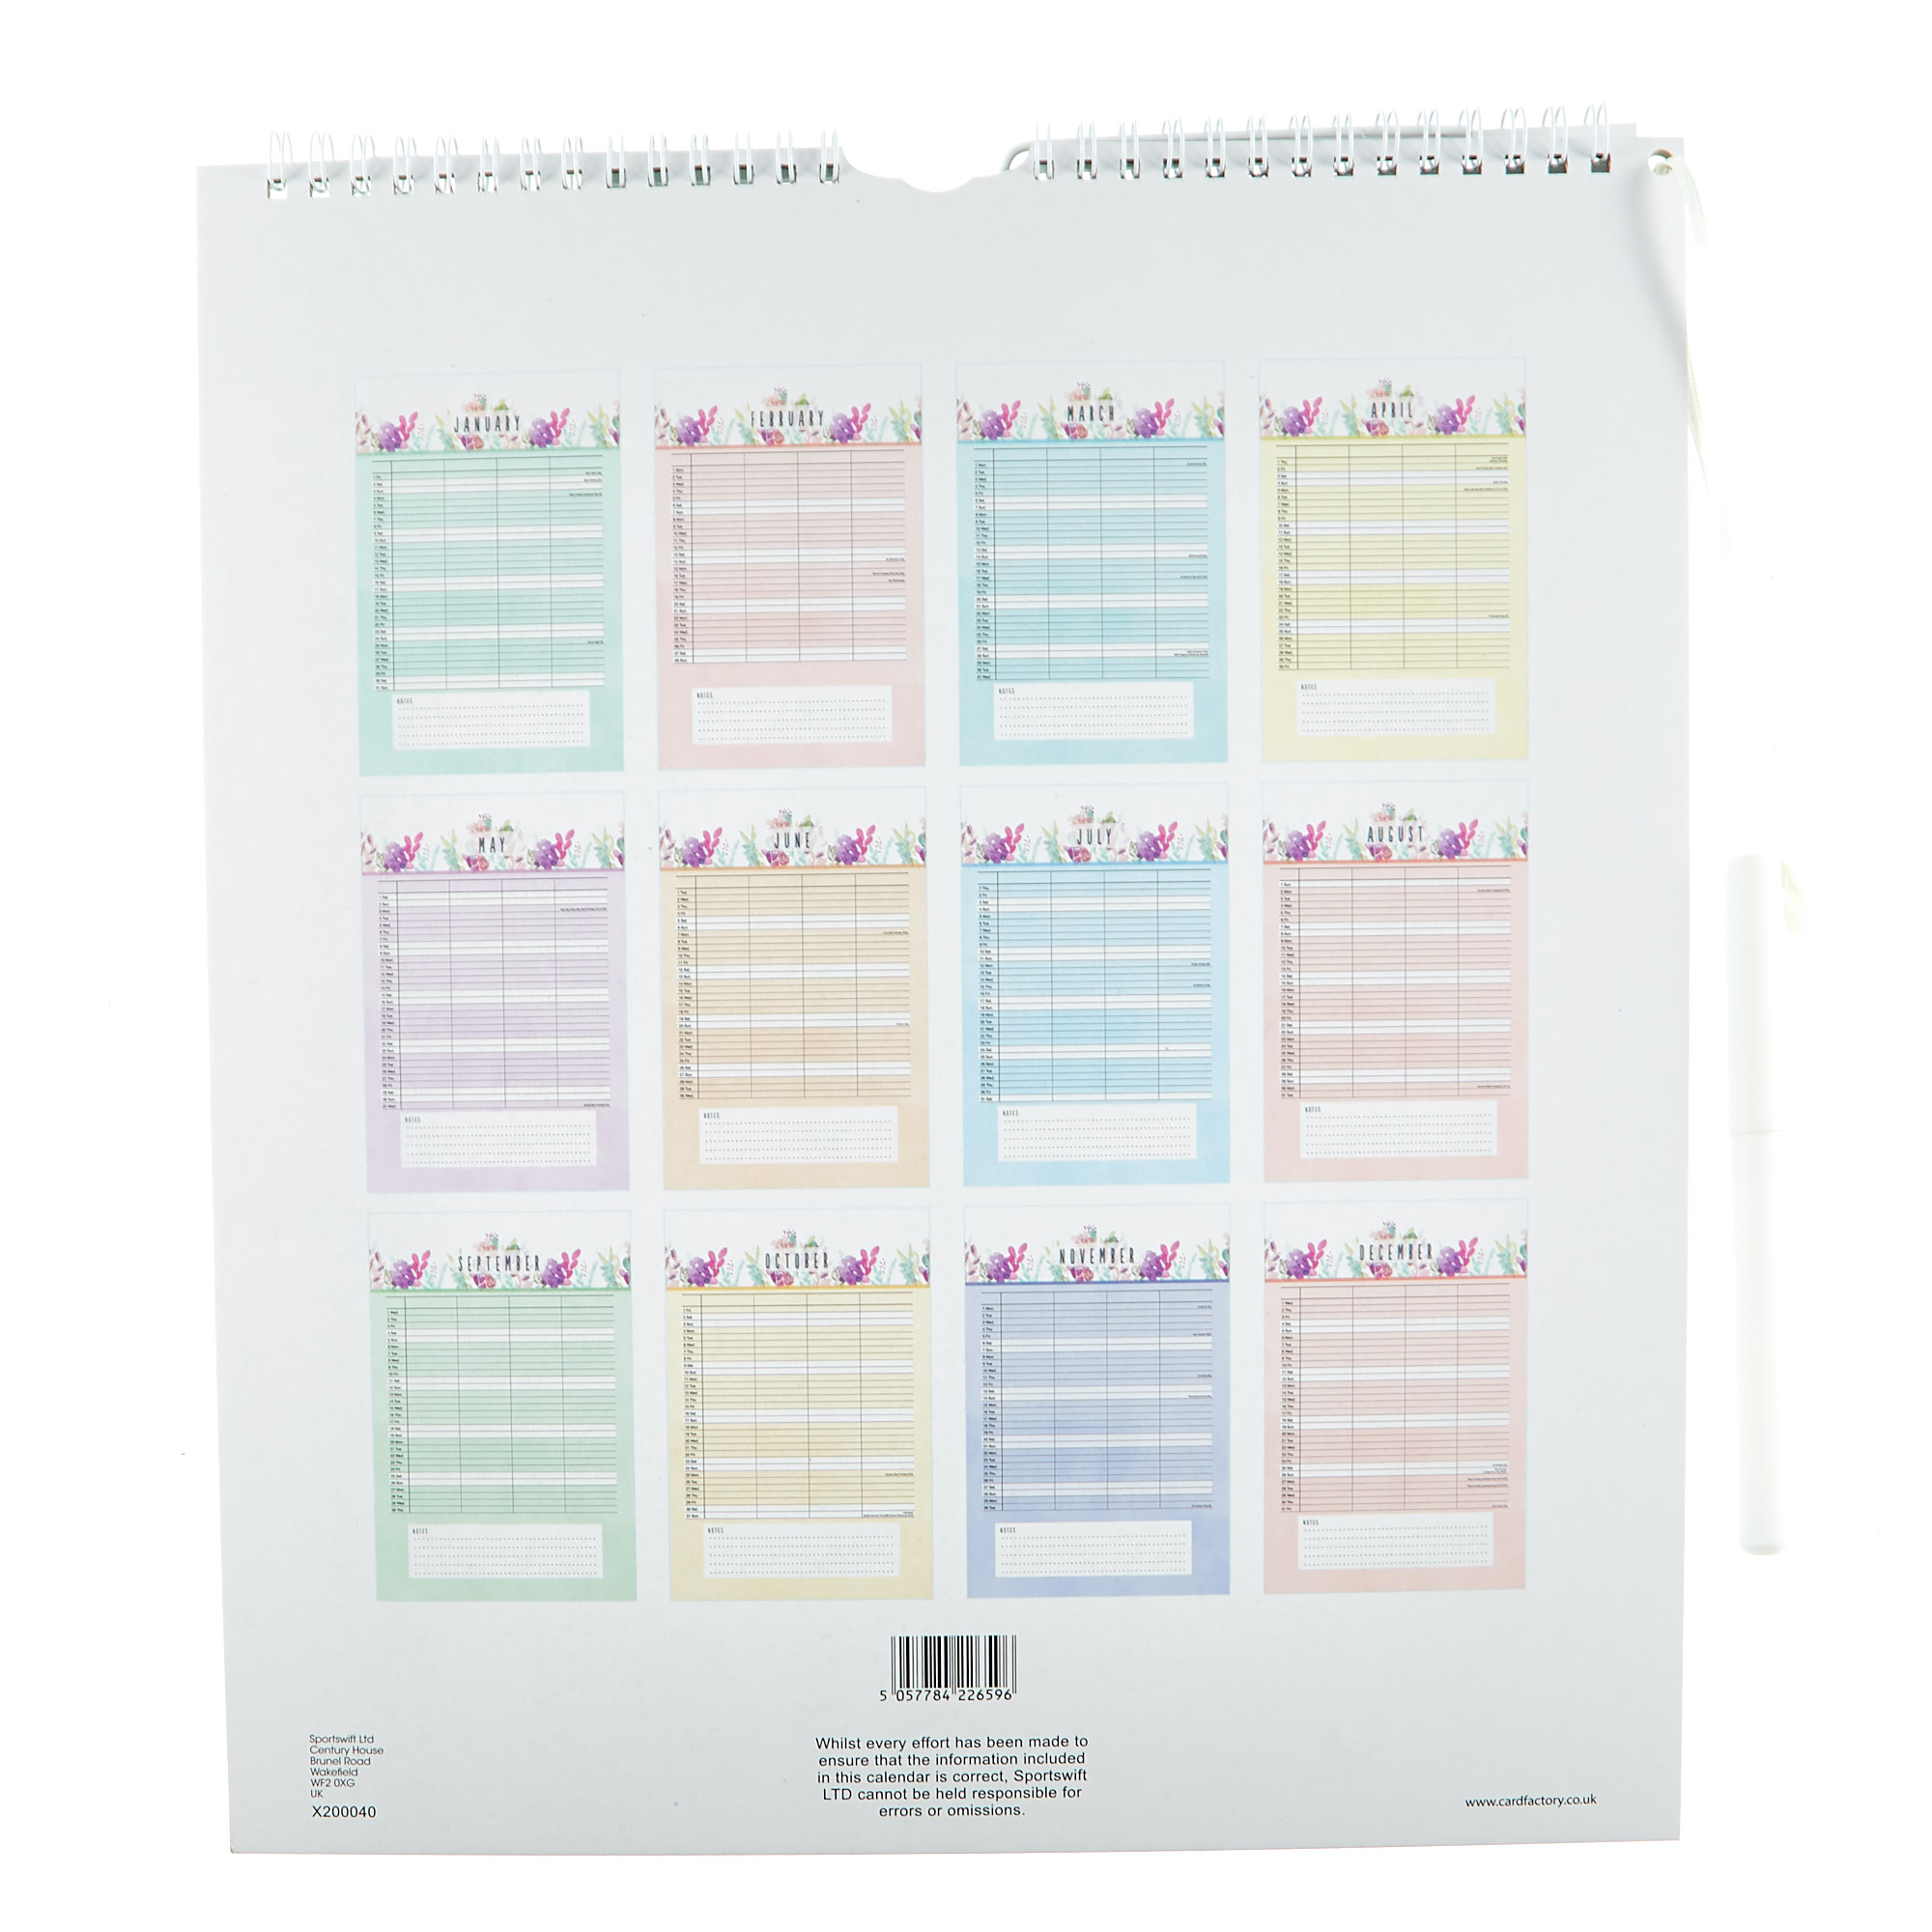 Floral Family 2021 Organiser With Pen